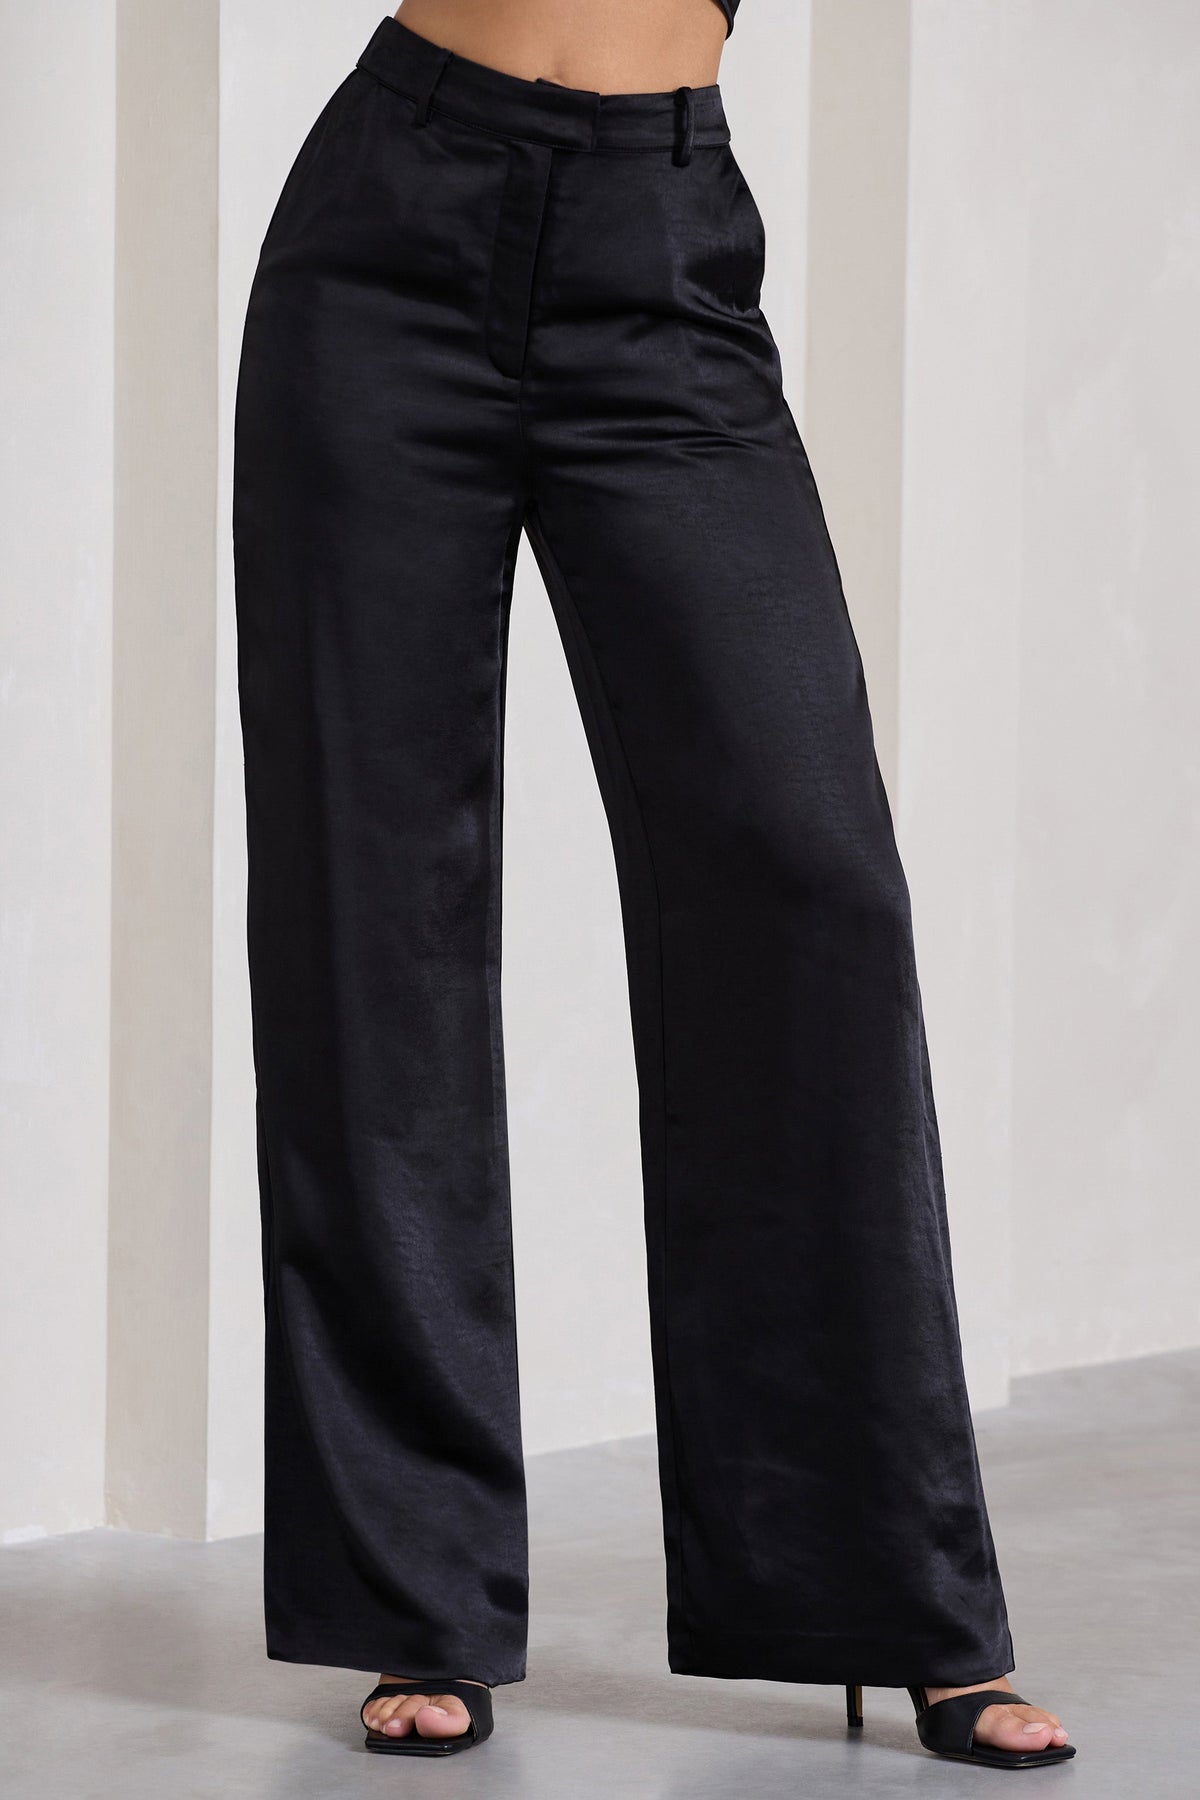 A New Day Women's High-Rise Wide Leg Satin Pants - Black 16 NWT - $20 New  With Tags - From Sonya